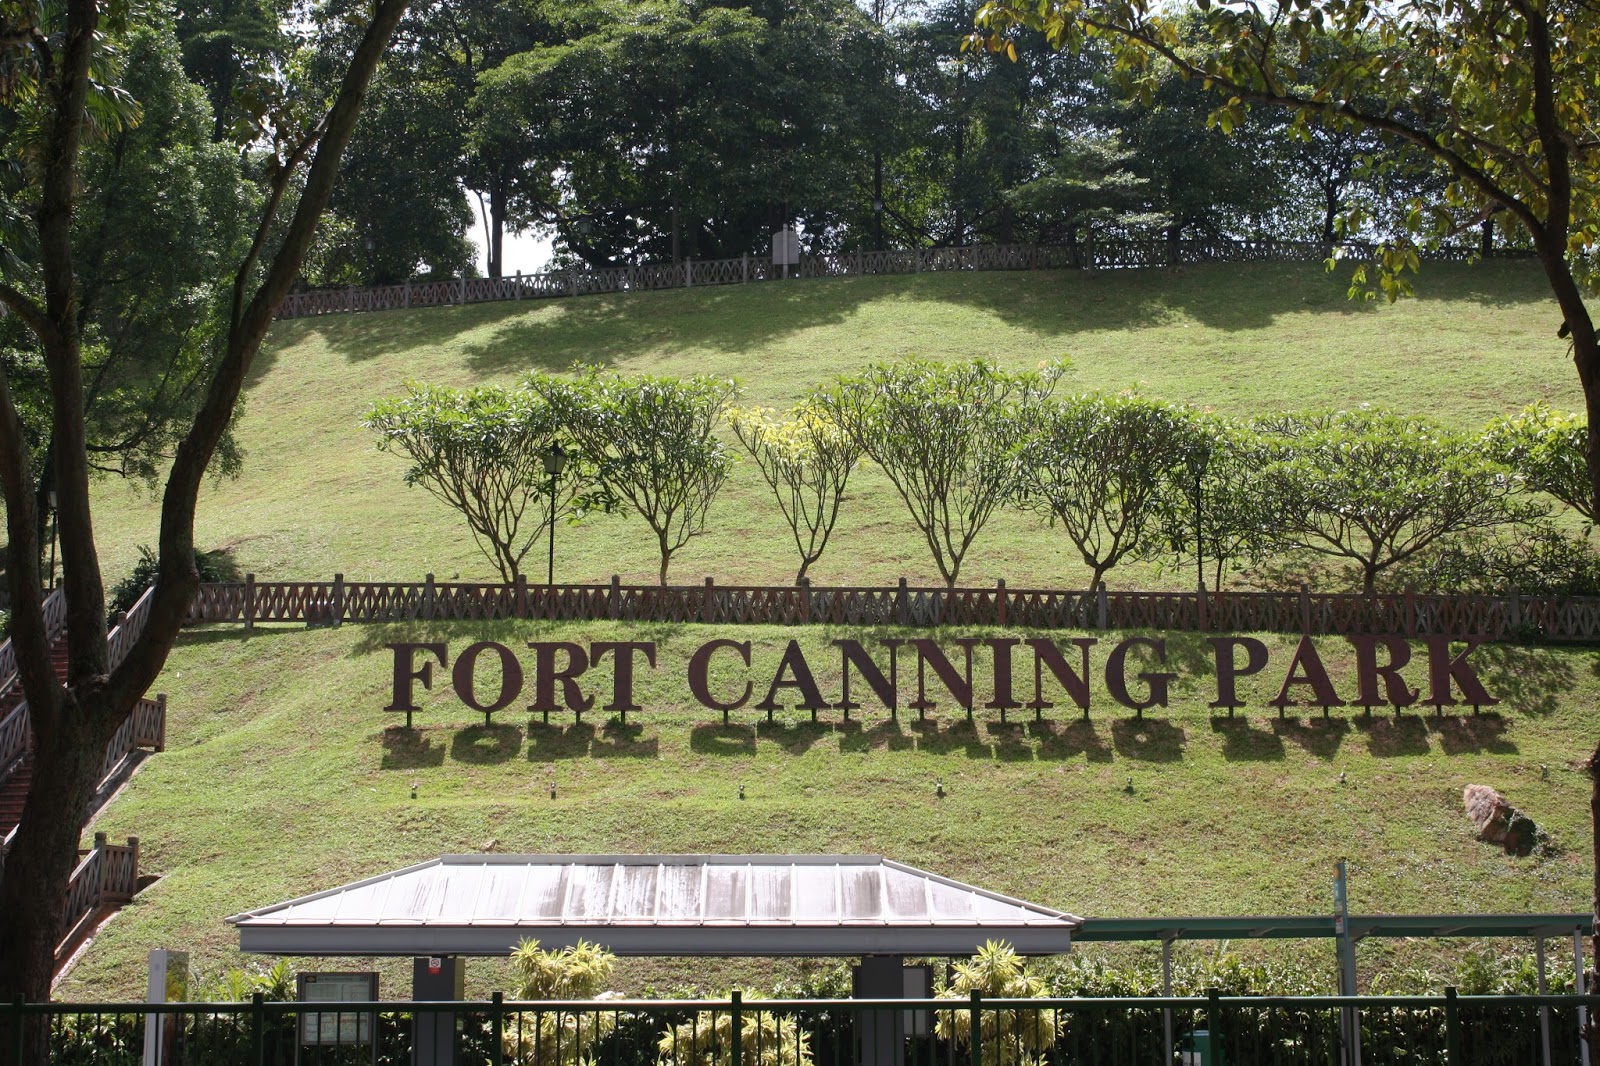 Fort Canning Park is an iconic hilltop landmark